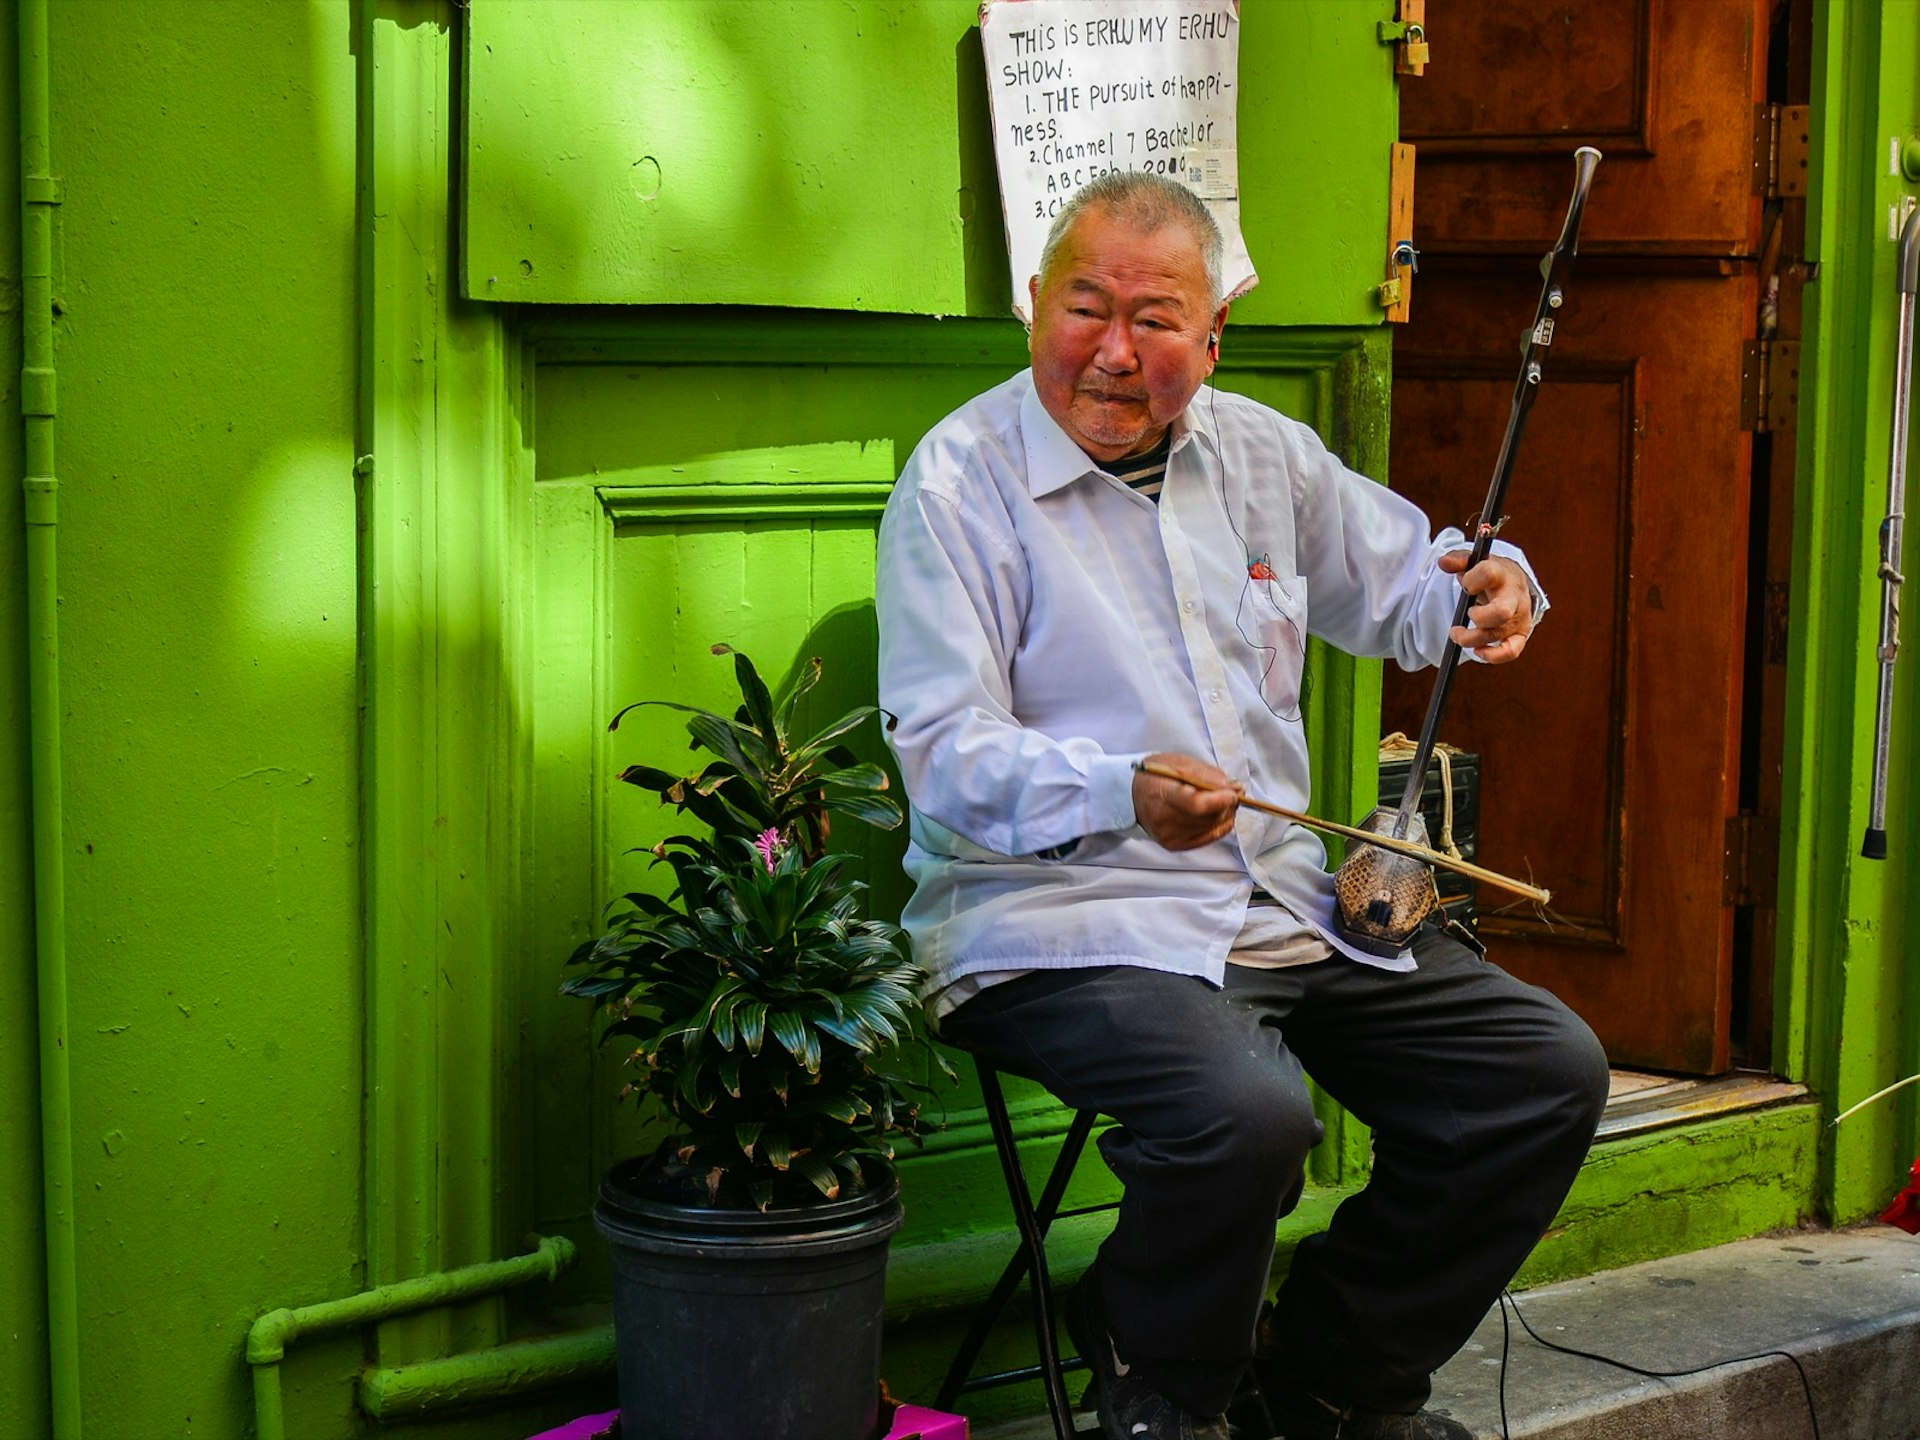 A man plays an instrument for tourists in a Chinatown Alleyway in San Francisco